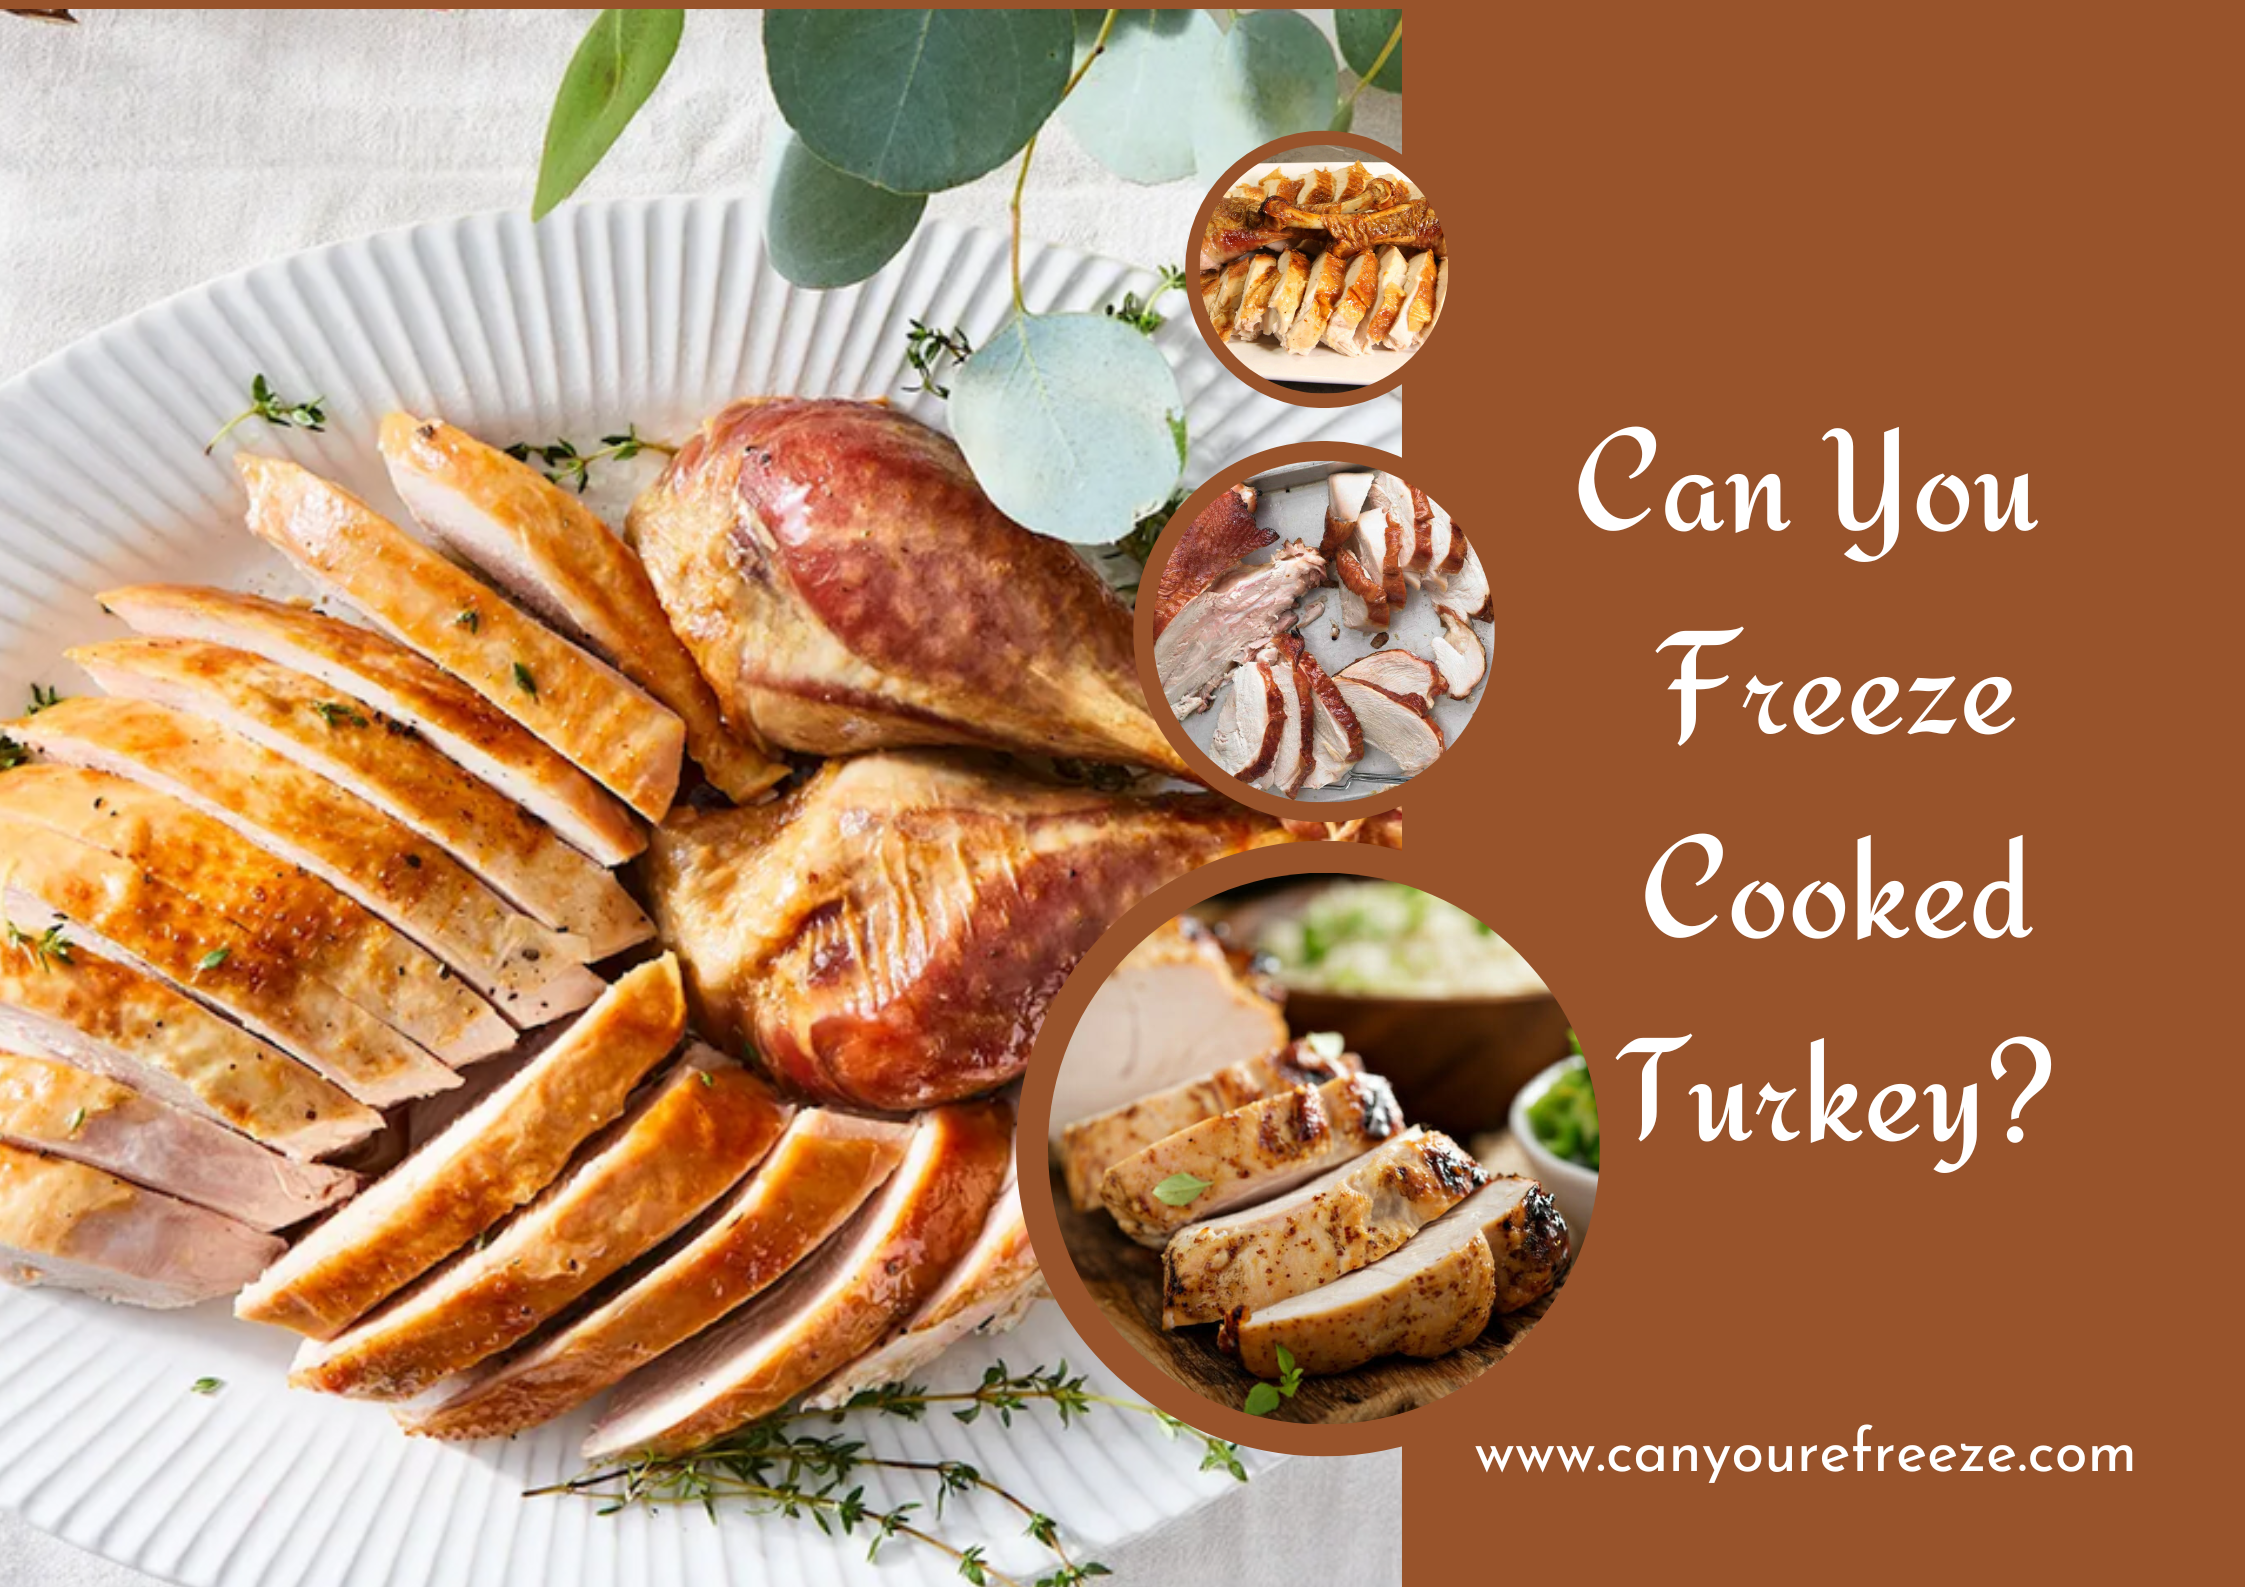 Can You Freeze Cooked Turkey